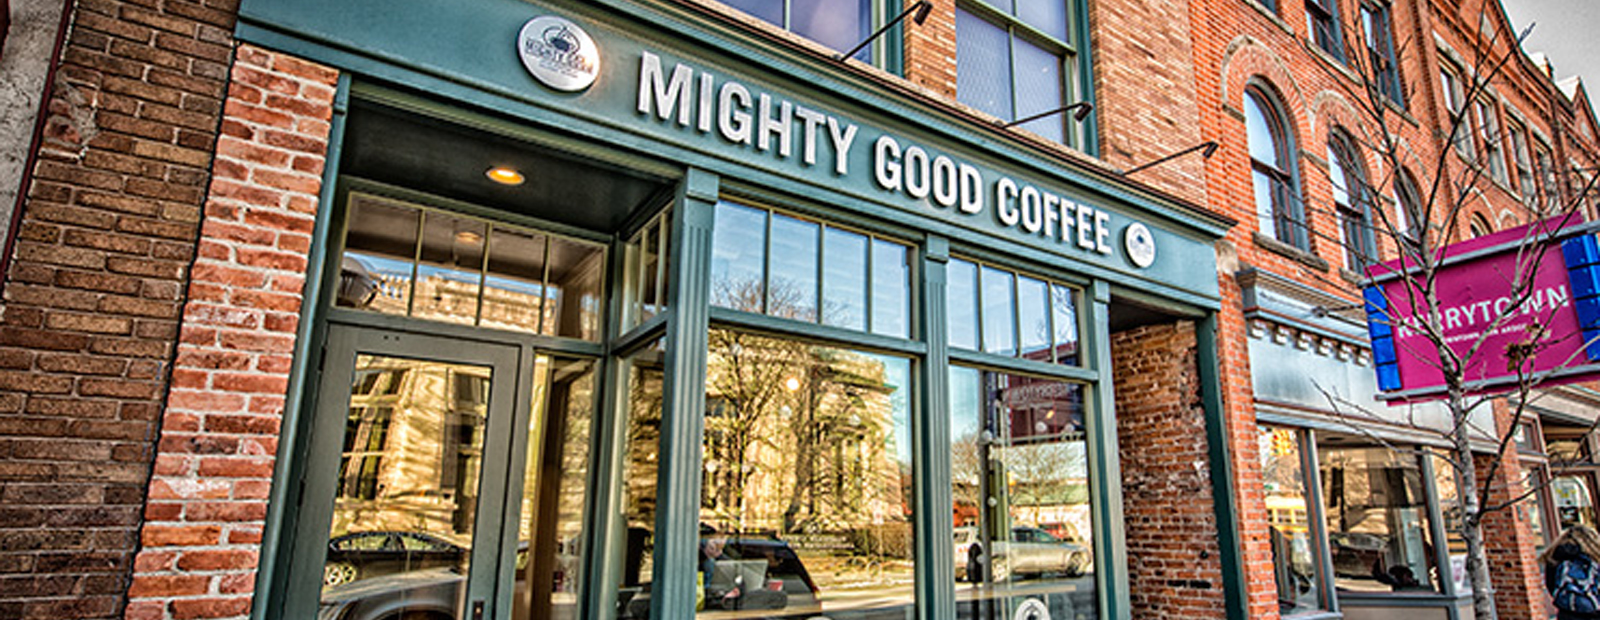 Mighty Good Coffee in Ann Arbor.